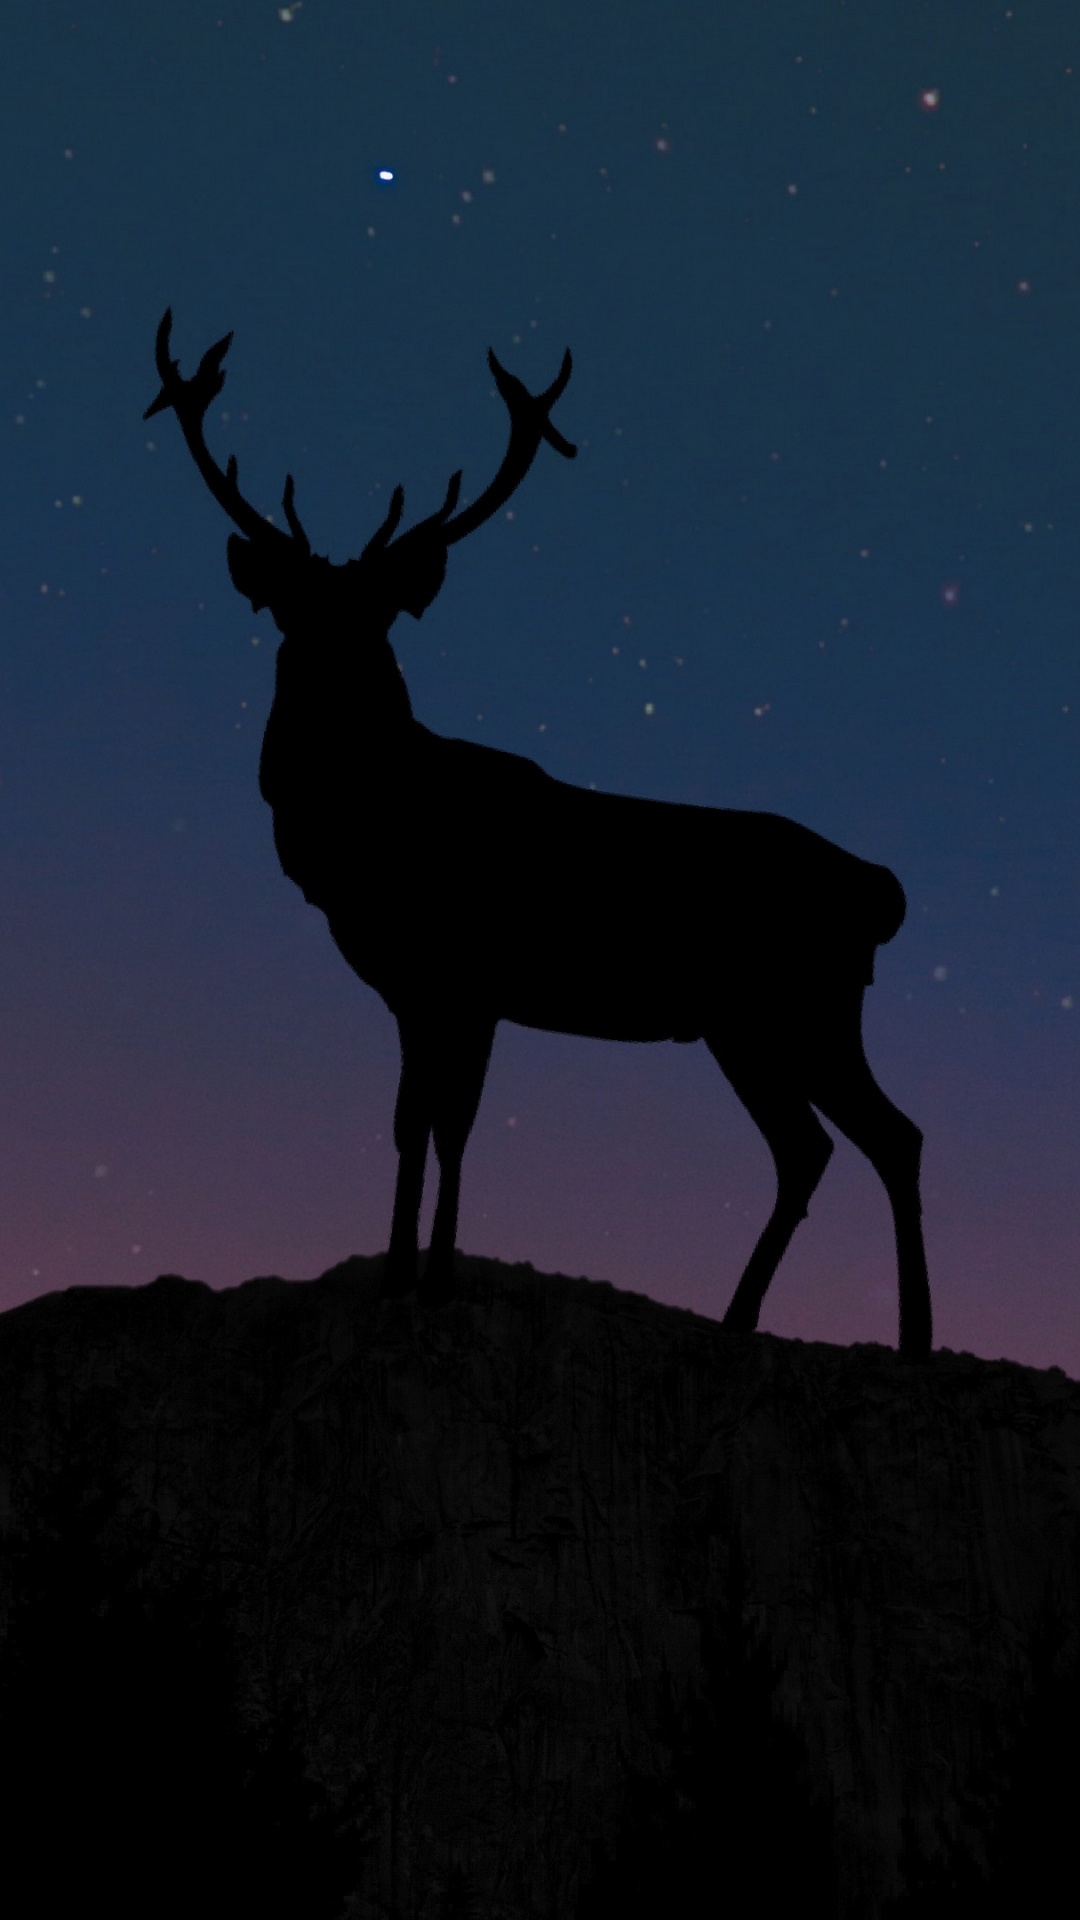 Brown Deer Standing on Rock During Night Time. Wallpaper in 1080x1920 Resolution